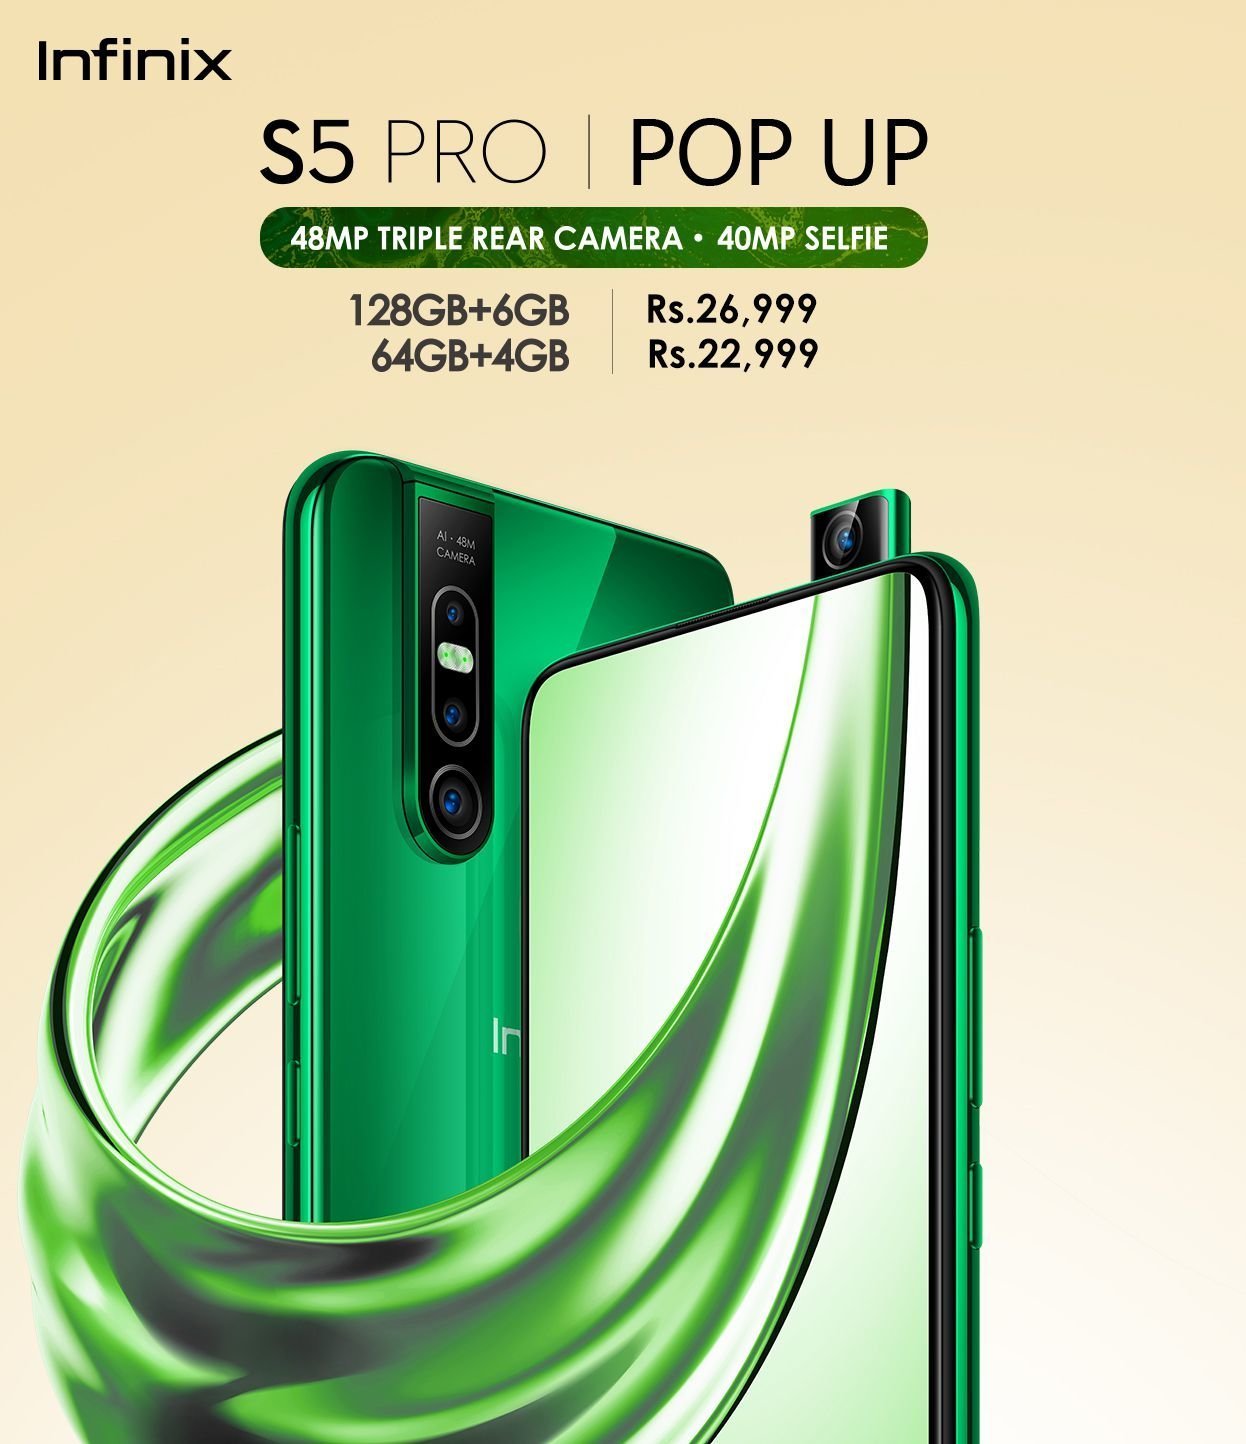 New version of Infinix S5 Pro launched in Pakistan, has 40-MP selfie